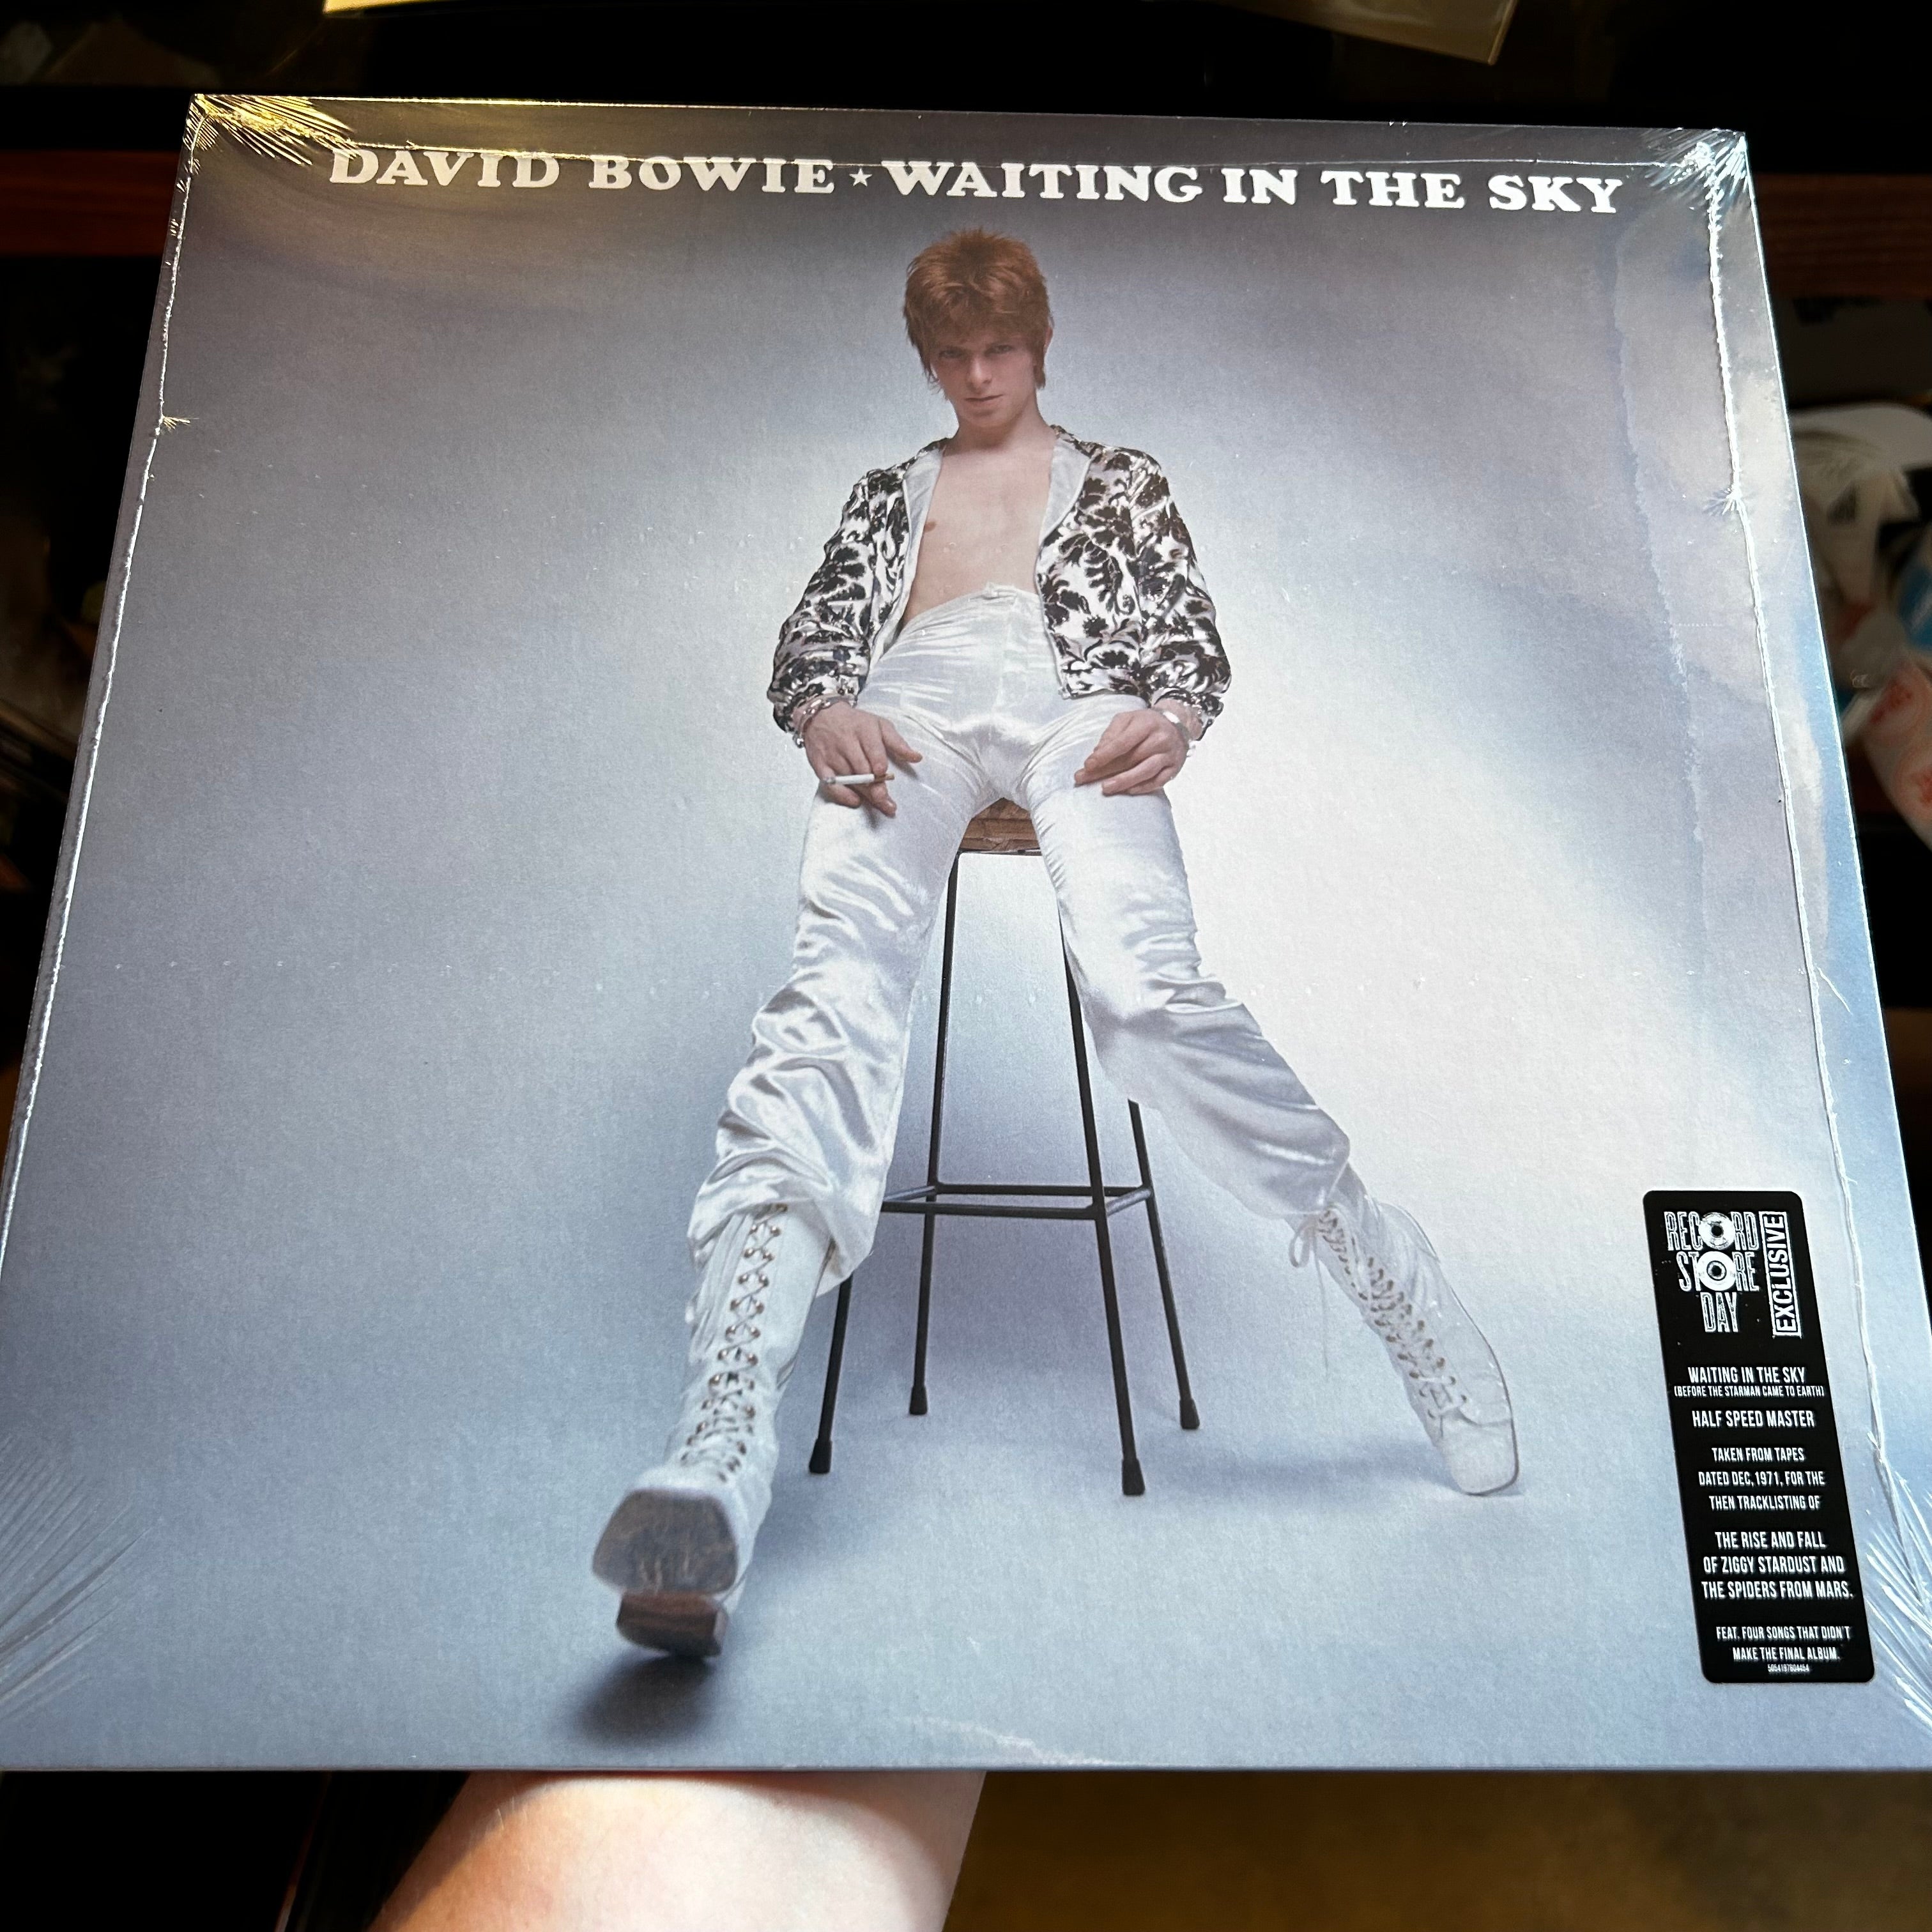 DAVID BOWIE - WAITING IN THE SKY (BEFORE THE STARMAN 